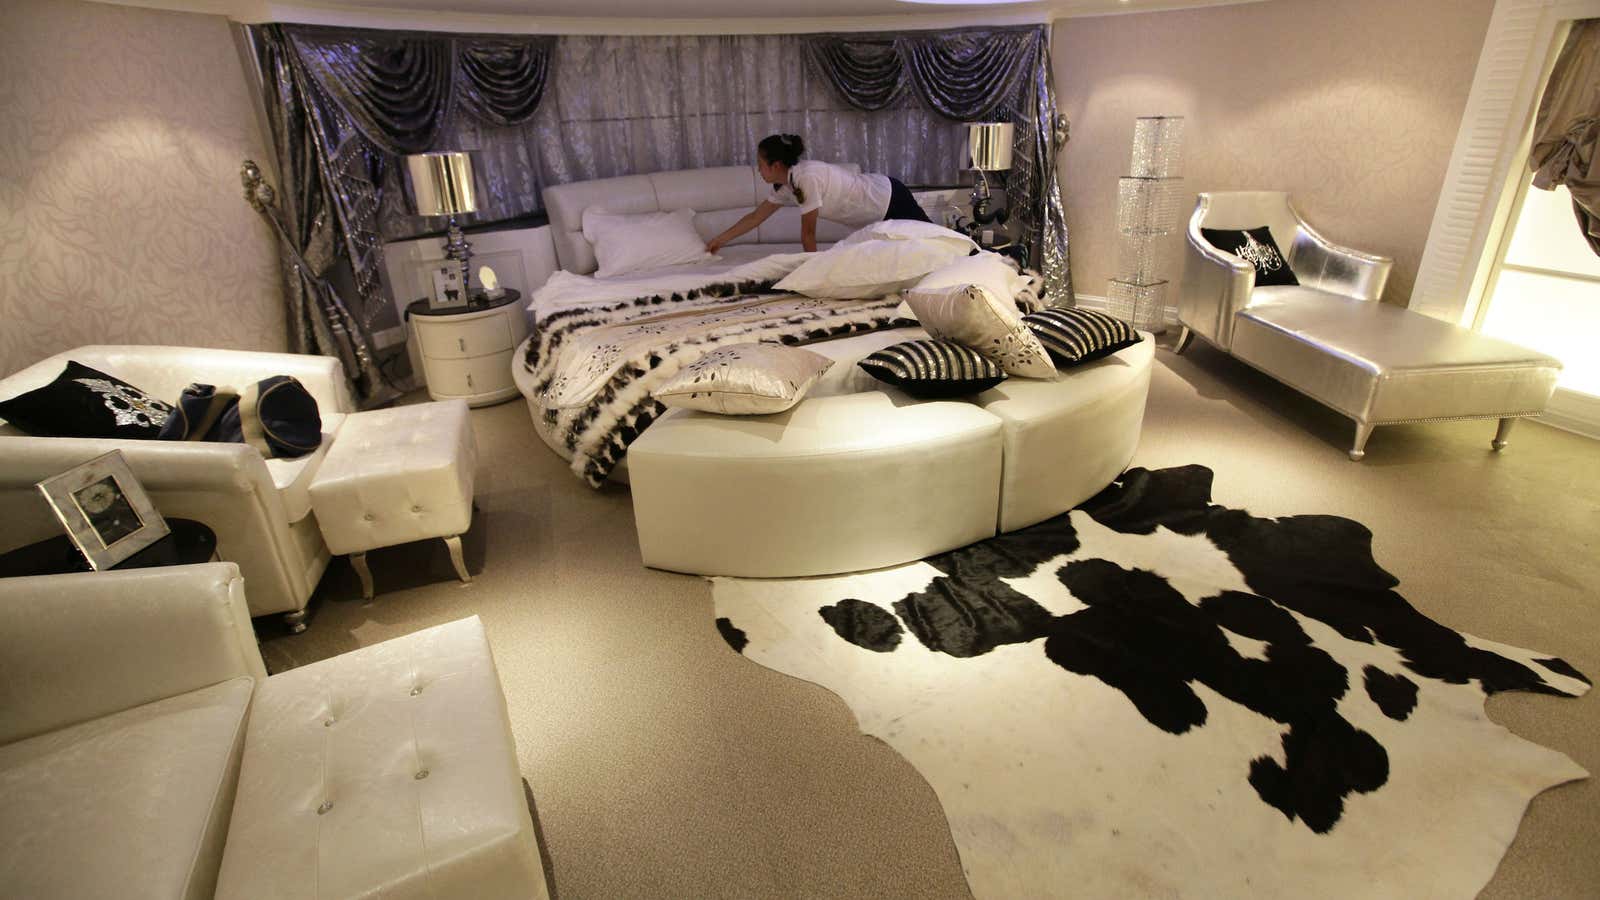 You’ll have to pay for the cowhide rug upgrade yourself.